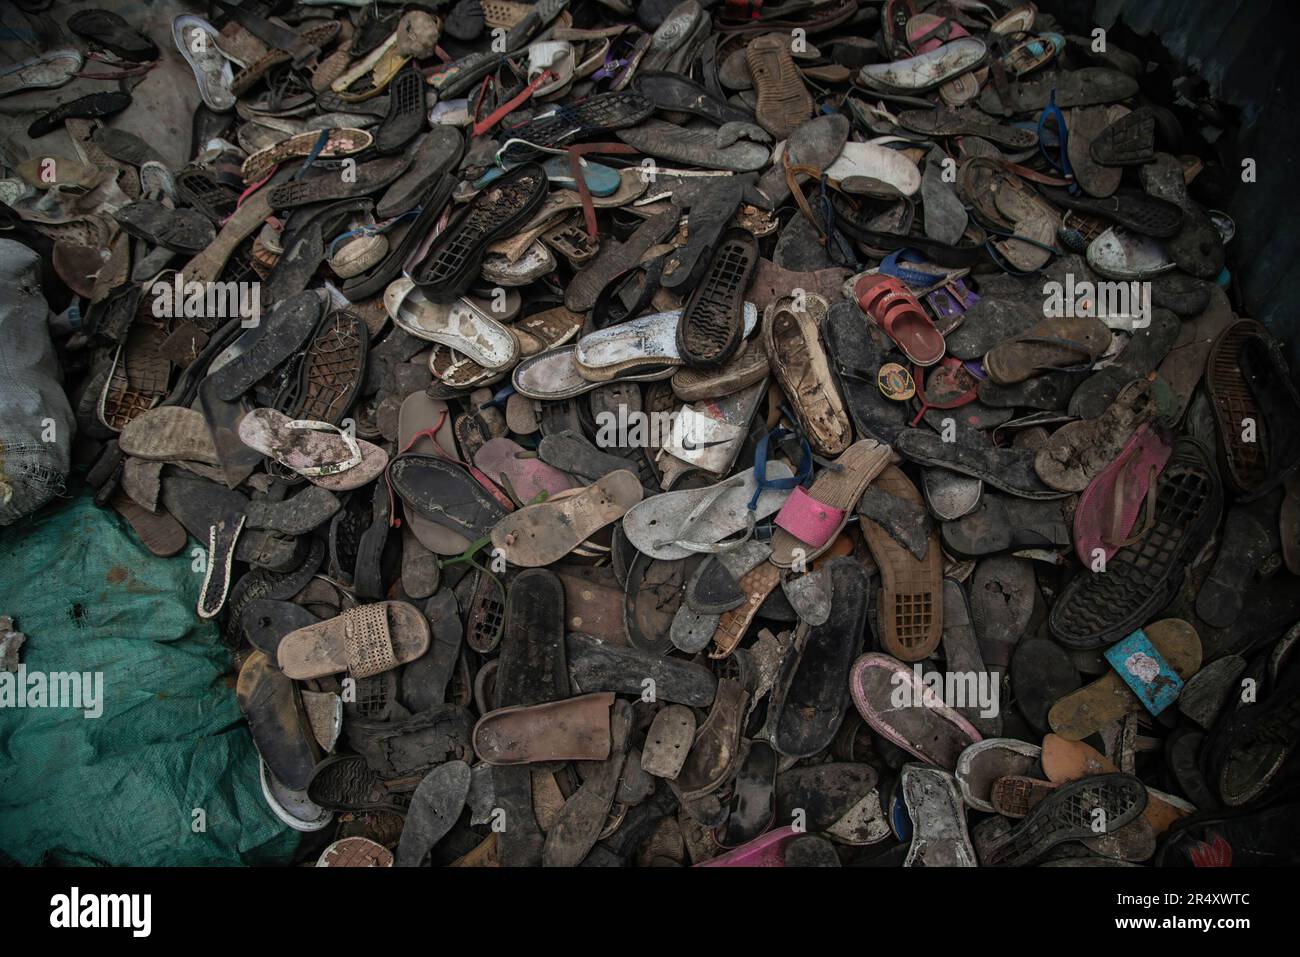 A pile of shoe waste at a plastic recycling plant in Nakuru. Negotiators have gathered in Paris, France for the second round of deliberations to develop a global treaty aimed at tackling the escalating issue of plastic pollution. According to a recent report by the United Nations Environment Programme (UNEP), countries have the potential to reduce plastic pollution by 80% by 2040 by eliminating unnecessary plastics, implementing recycling and reuse strategies, introducing deposit return schemes, and substituting plastic with sustainable alternative materials. (Photo by James Wakibia/SOPA Ima Stock Photo